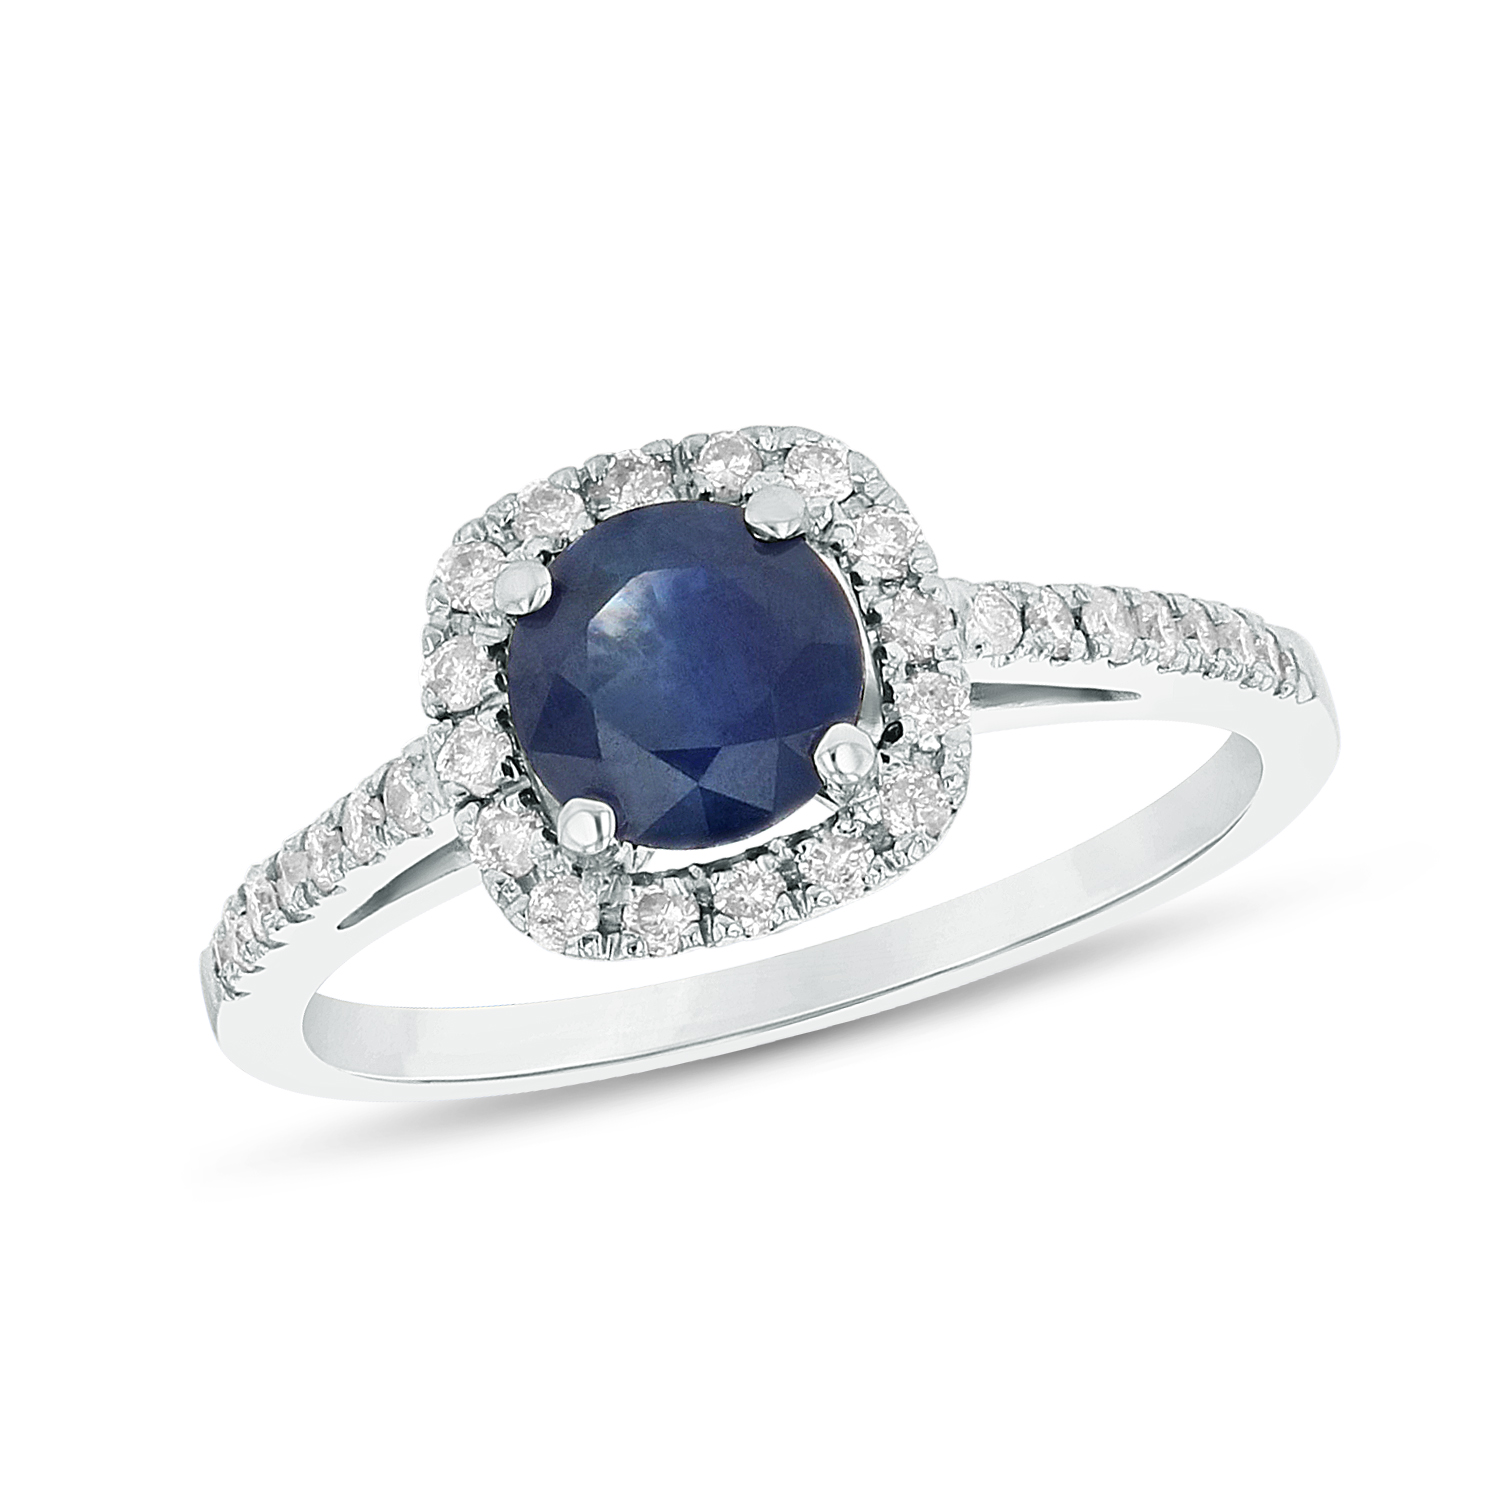 1.35ctw Sapphire and Diamond Engagement Ring in 14k White Gold